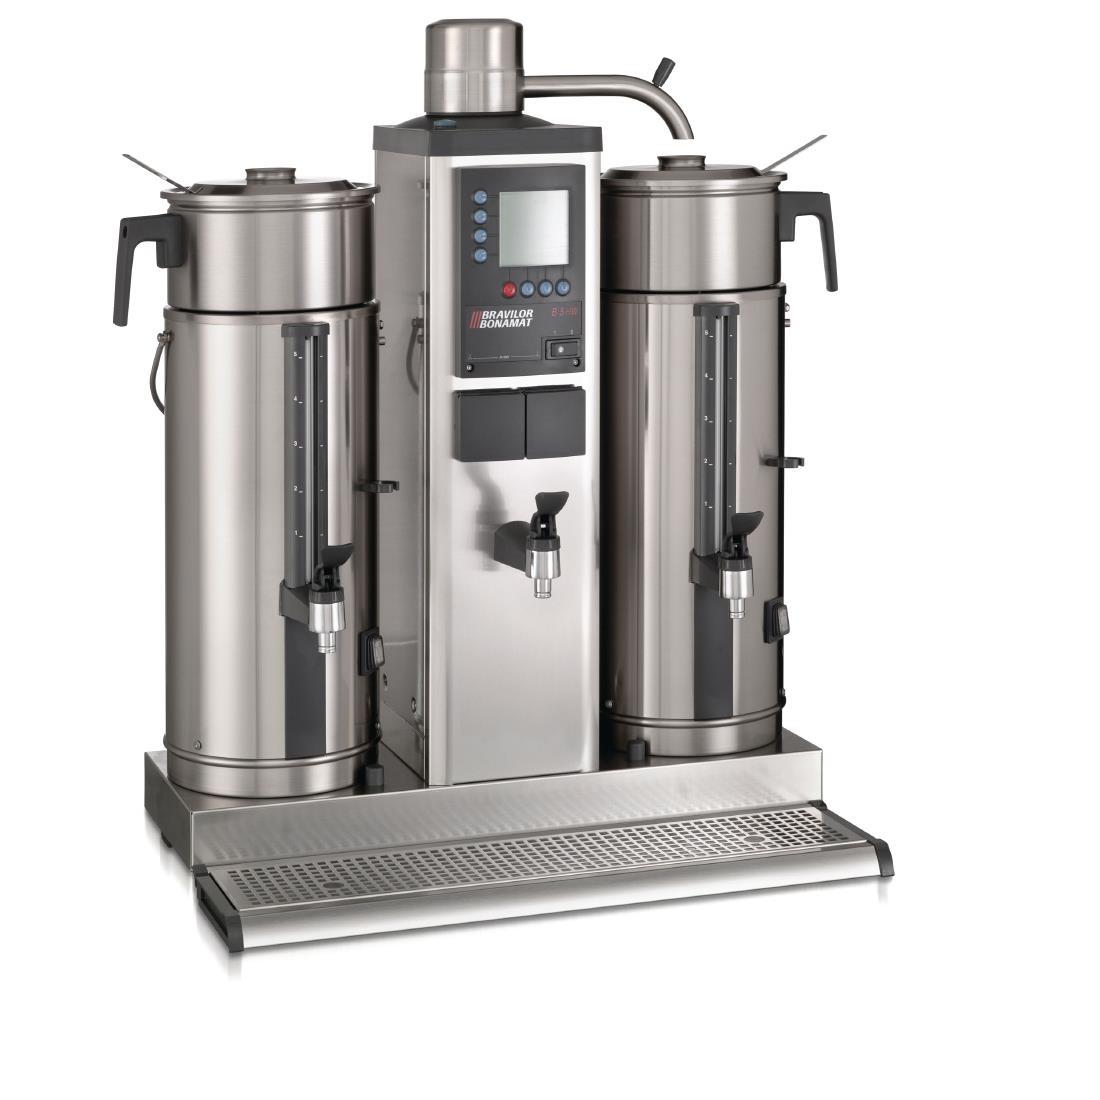 Bravilor B5 HW Bulk Coffee Brewer with 2x5Ltr Coffee Urns and Hot Water Tap Single Phase - DC687-1P  - 3